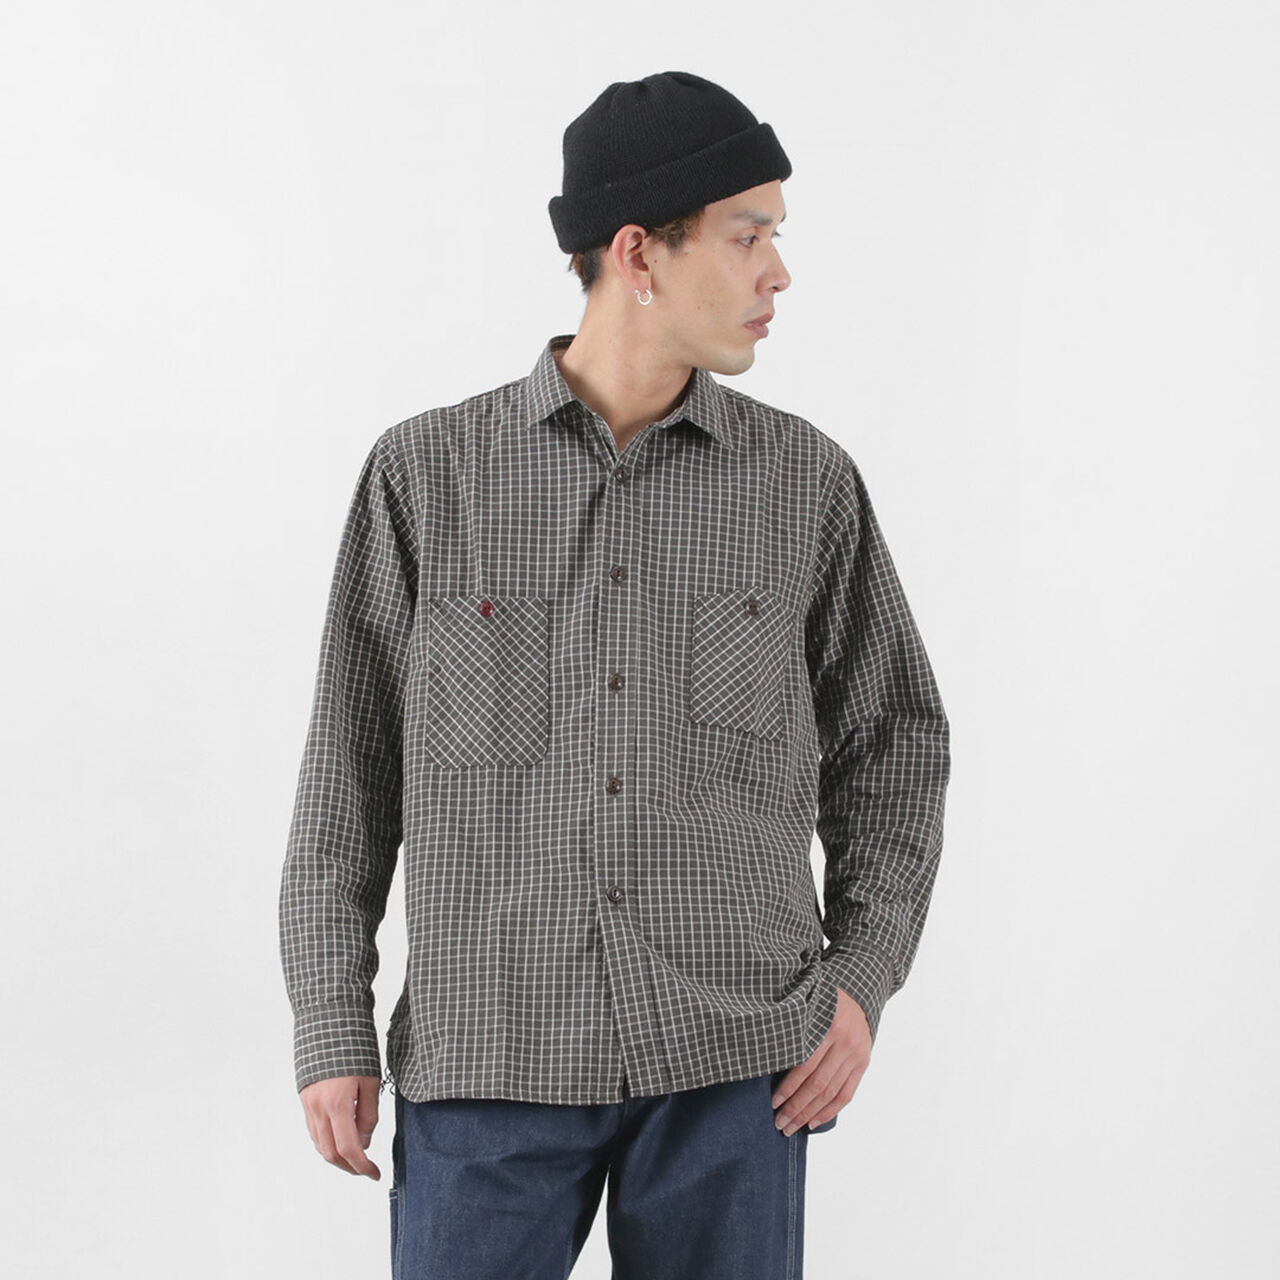 F3489 GRAPH CHECK WORK SHIRT,, large image number 14